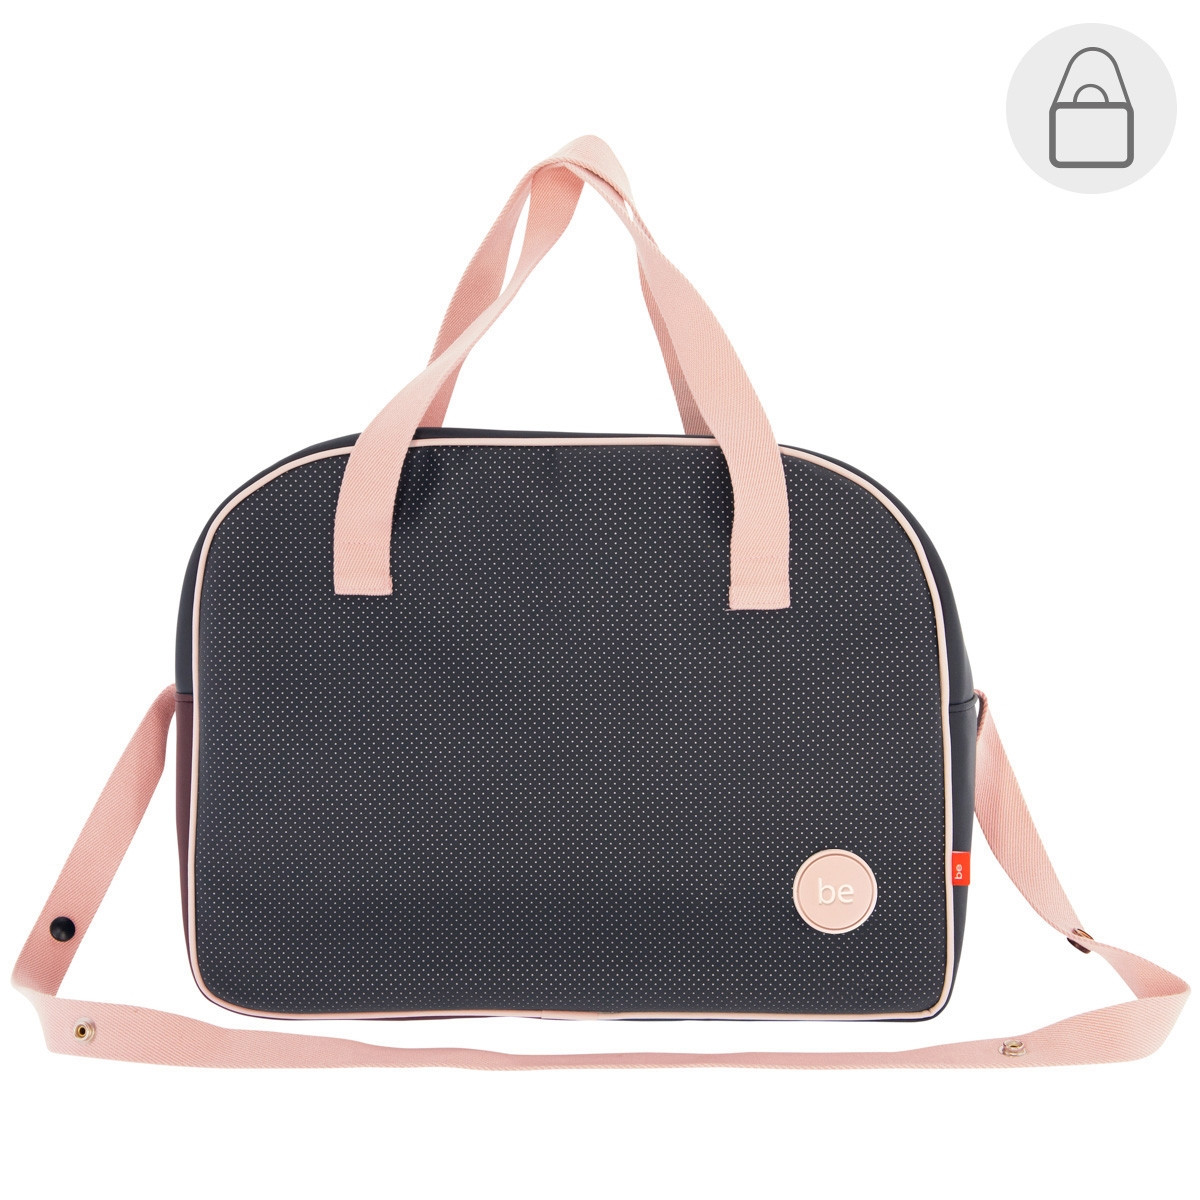 MATERNITY BAG PROME URBANY PINK 18x44x33 CM CAMBRASS - 3